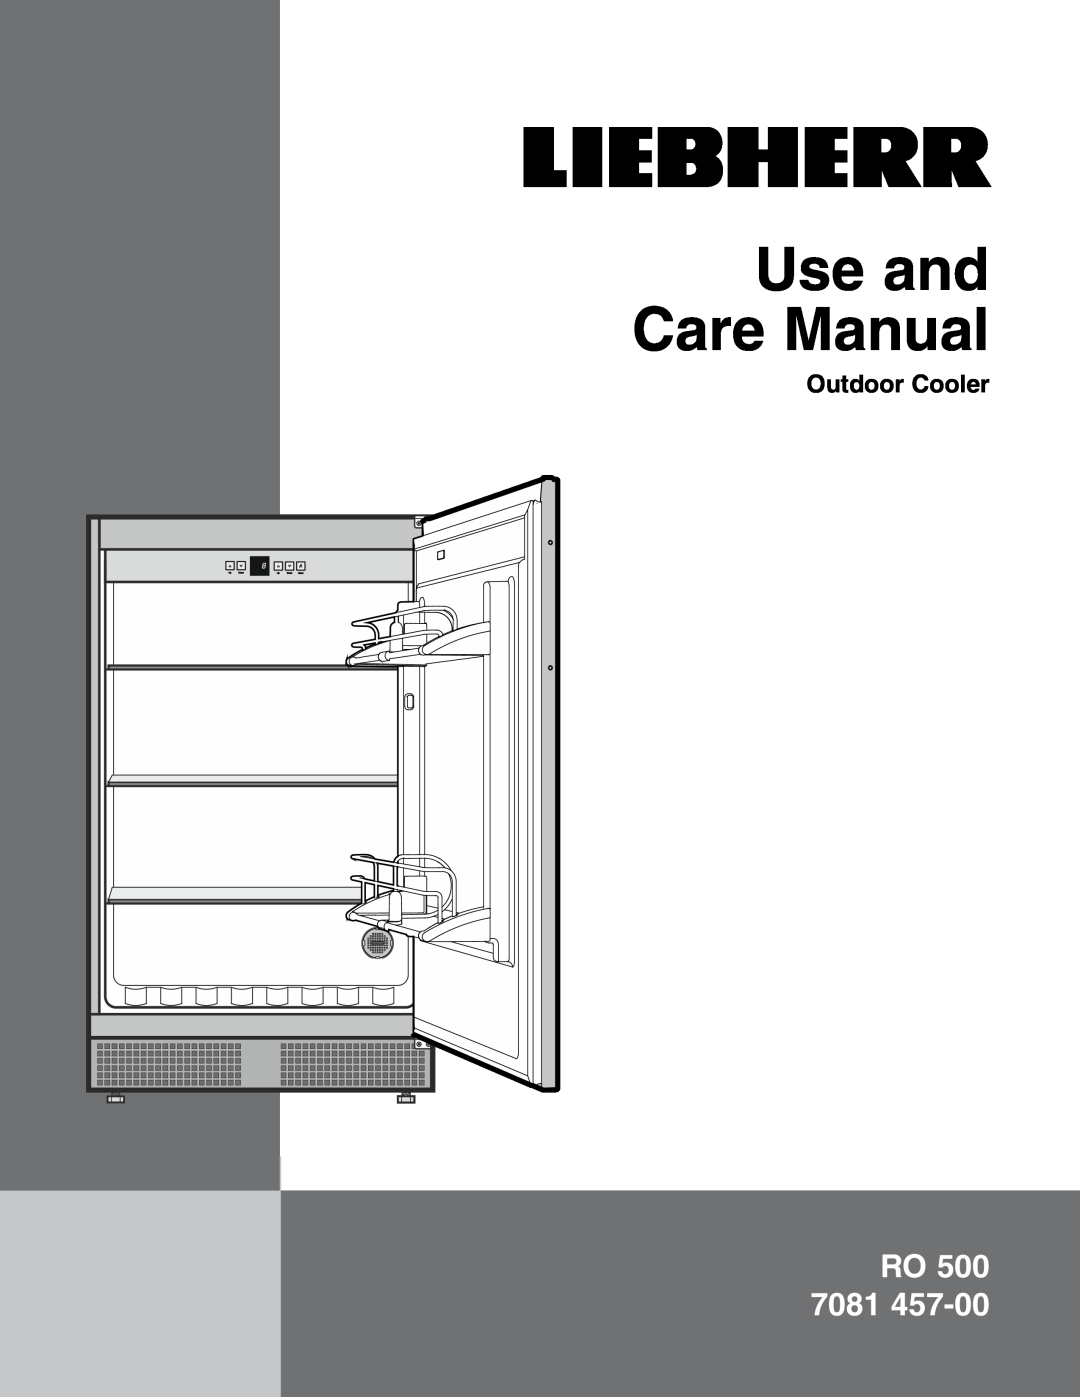 Liebherr 7081 457-00, RO 500 manual Outdoor Cooler, Use and Care Manual, Ro 